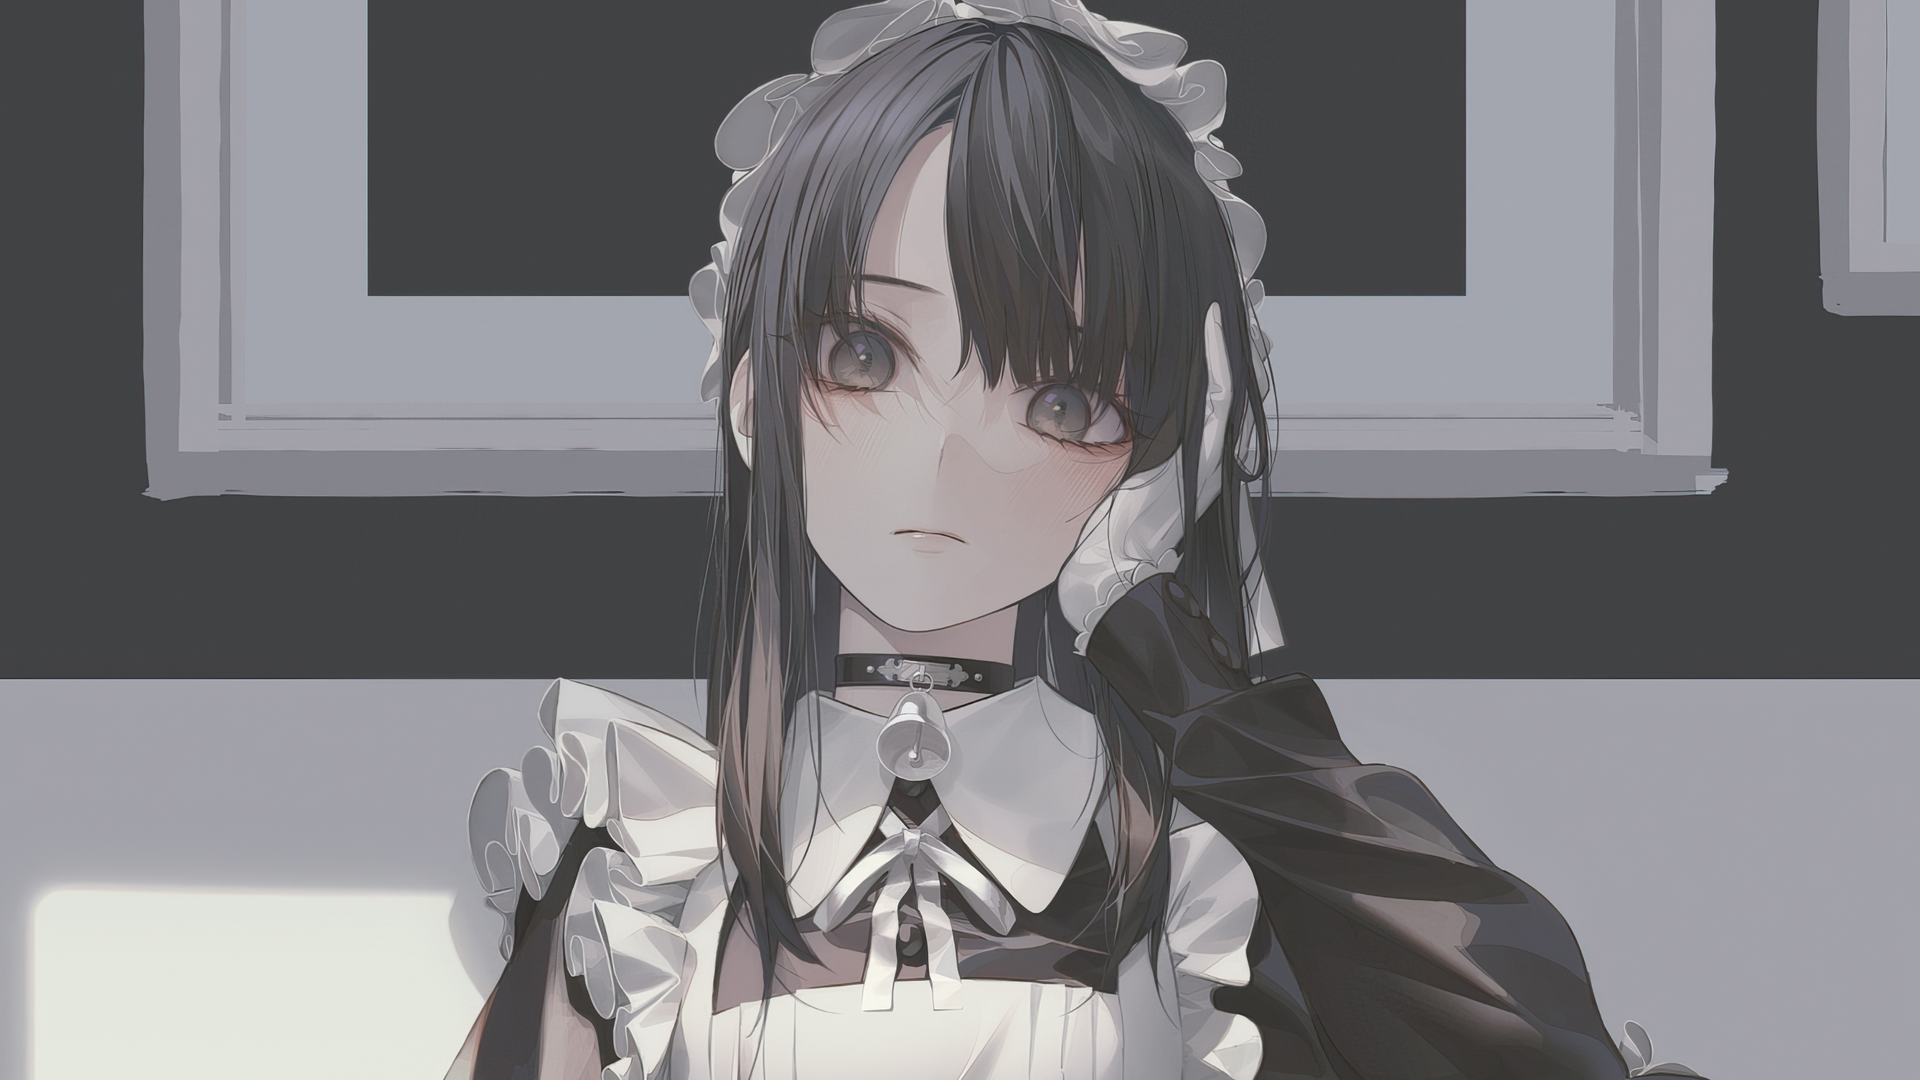 Maid Maid Outfit Necklace Gloves Silver Eyes Bell Anime Girls Women 1920x1080